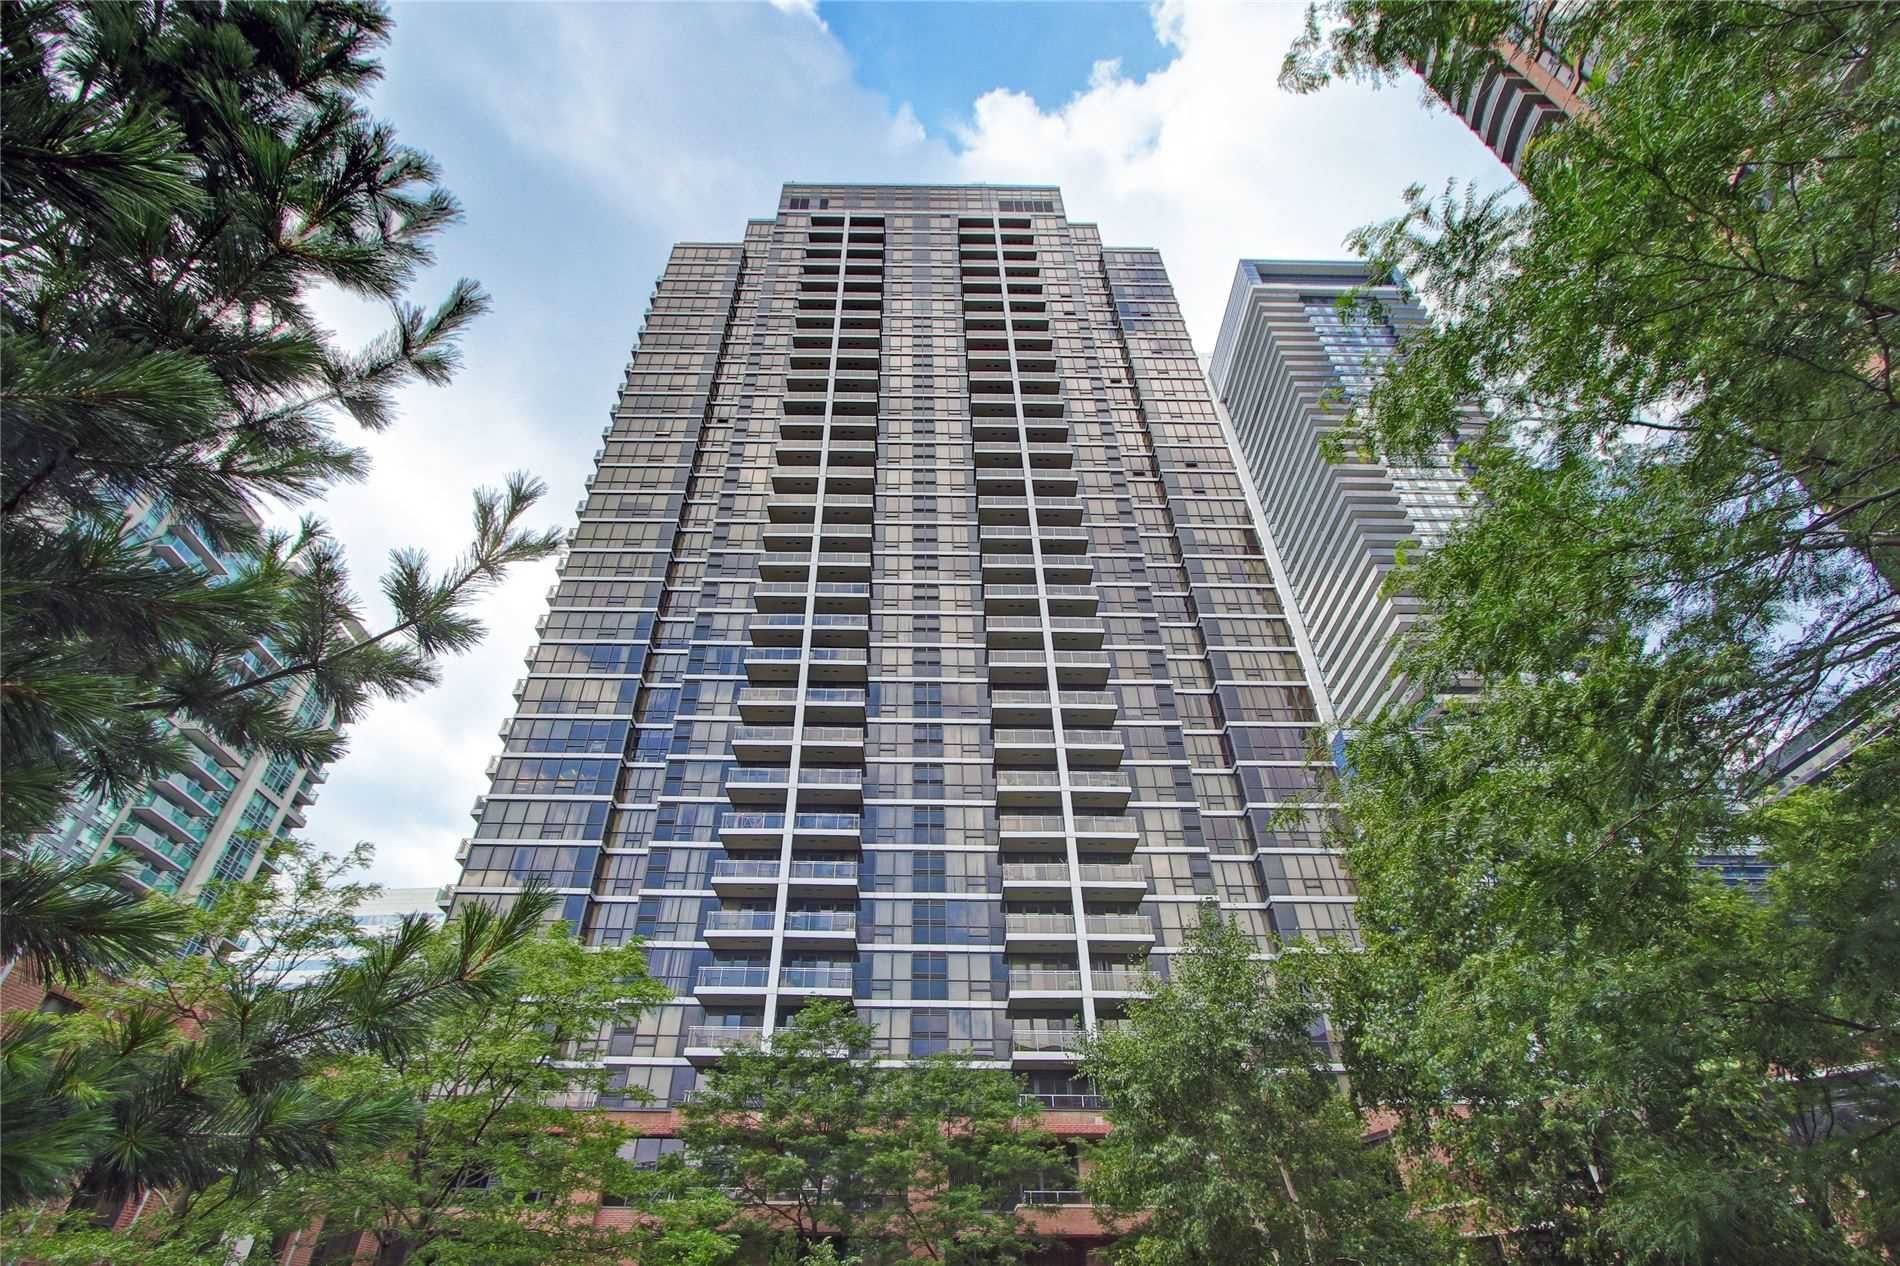 Main Photo: 1001 23 Sheppard Avenue in Toronto: Willowdale East Condo for lease (Toronto C14)  : MLS®# C4559291